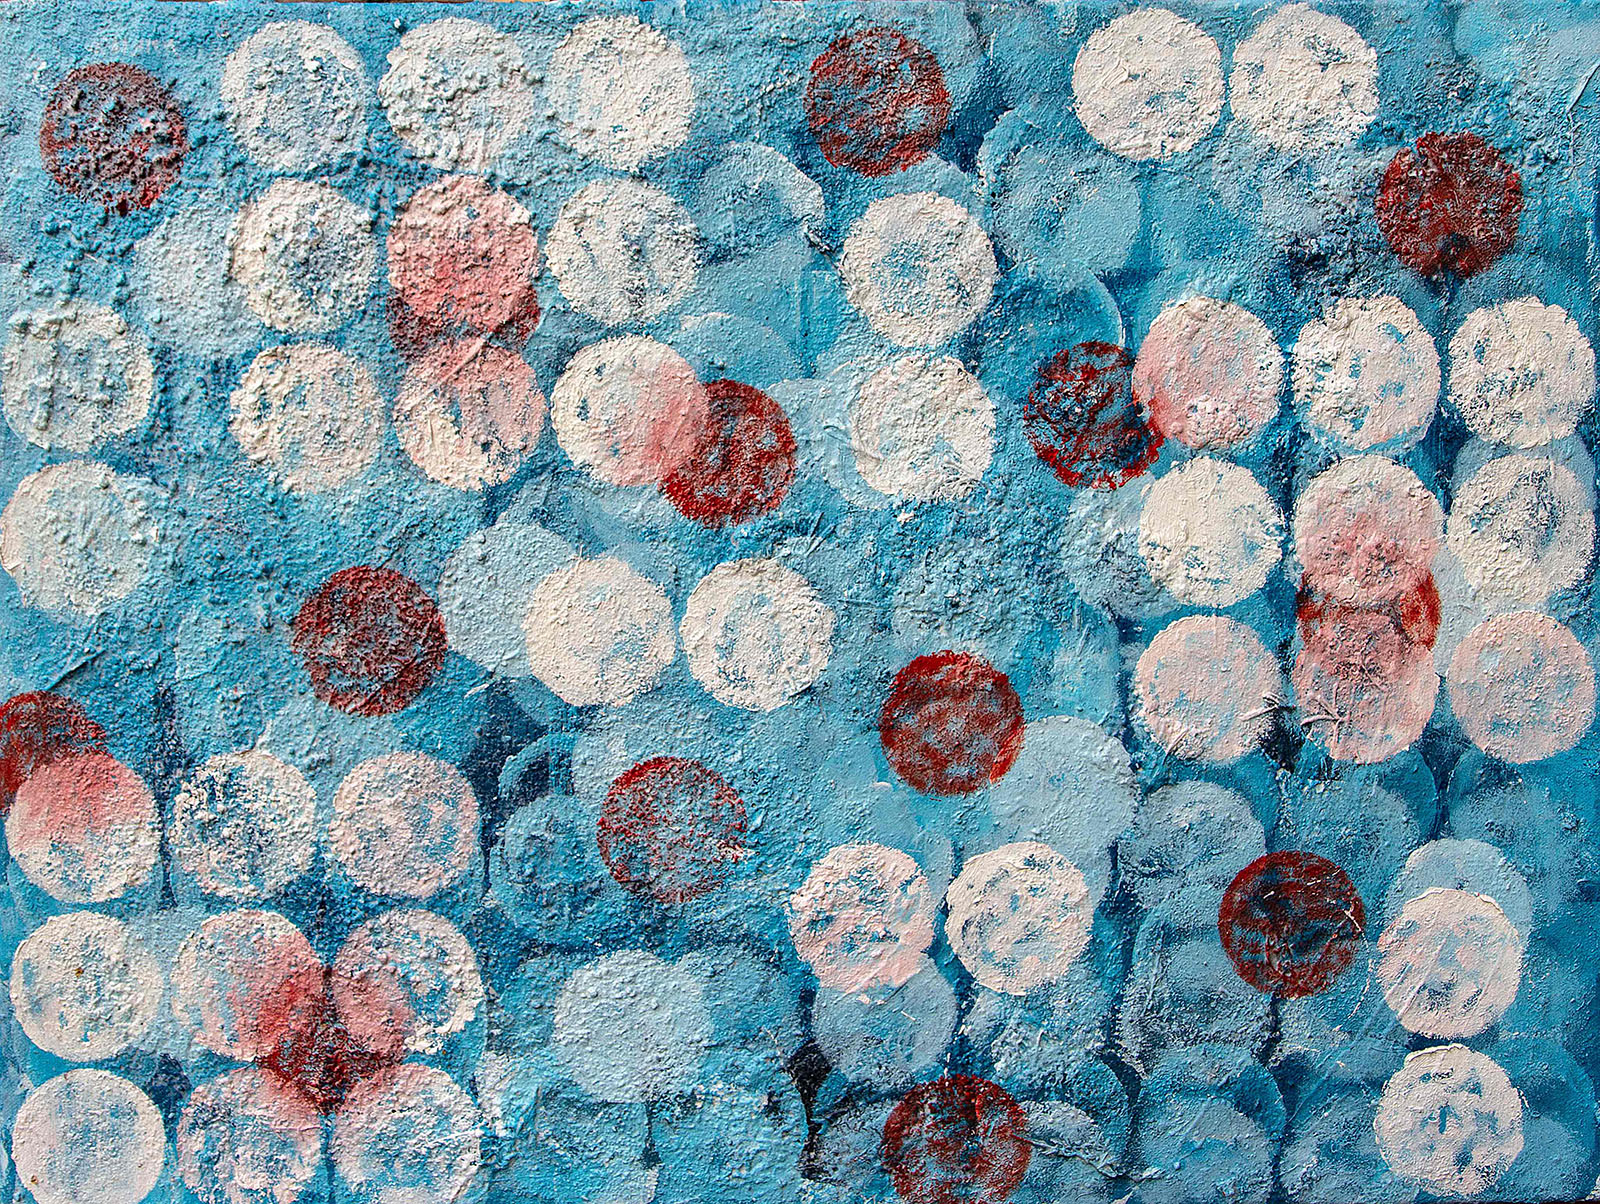 acryl-on-canvas white and red dots on blue background